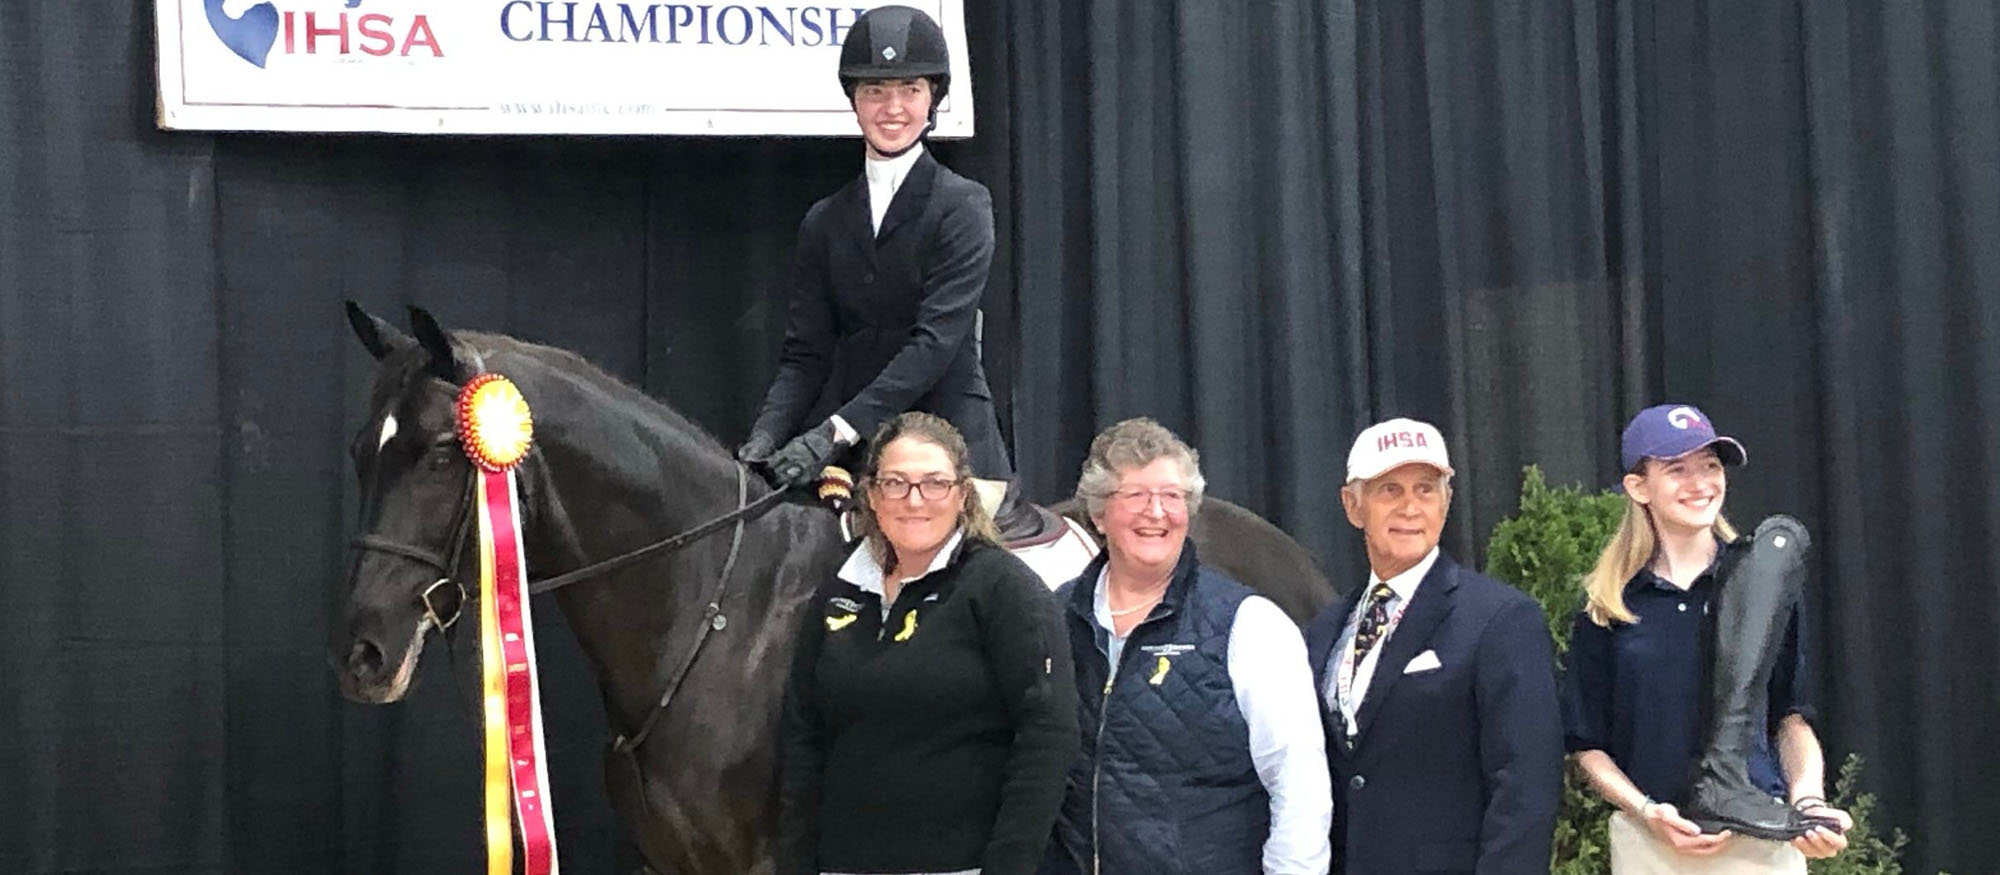 Mirarchi Leads Riding to Fifth Overall After Day One of IHSA National Championships